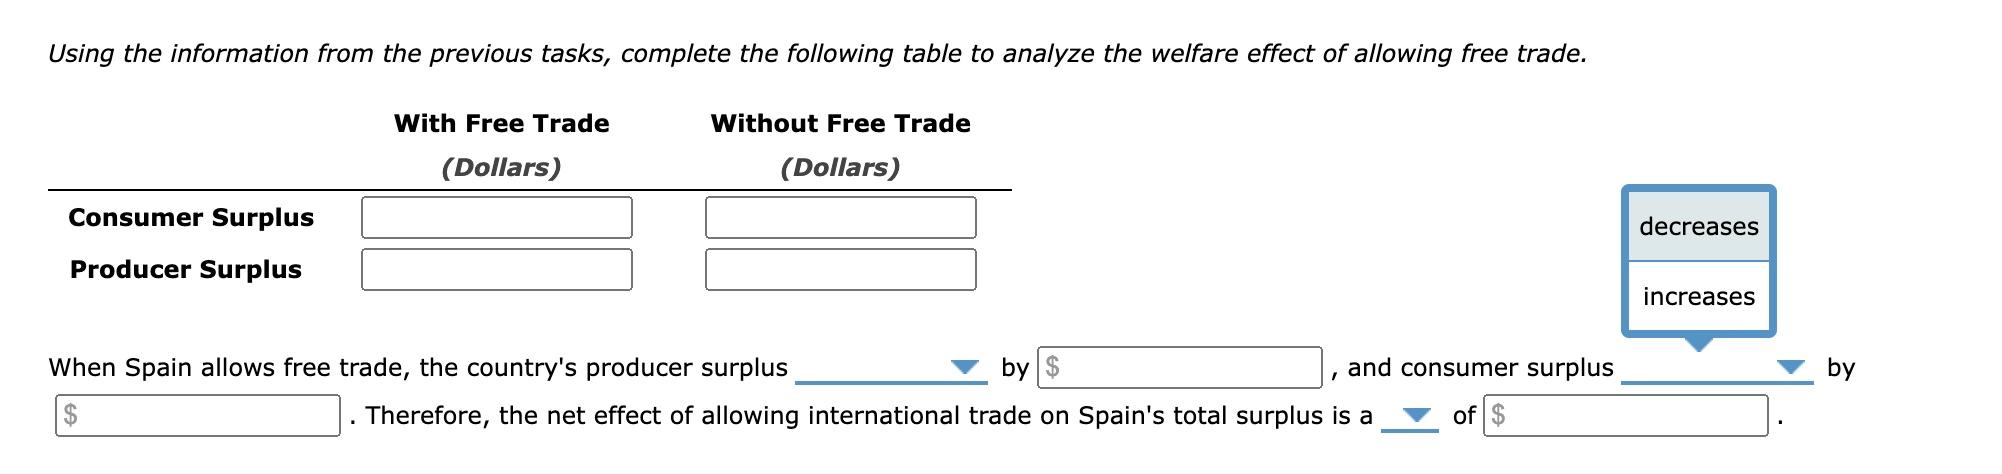 Using the information from the previous tasks, complete the following table to analyze the welfare effect of